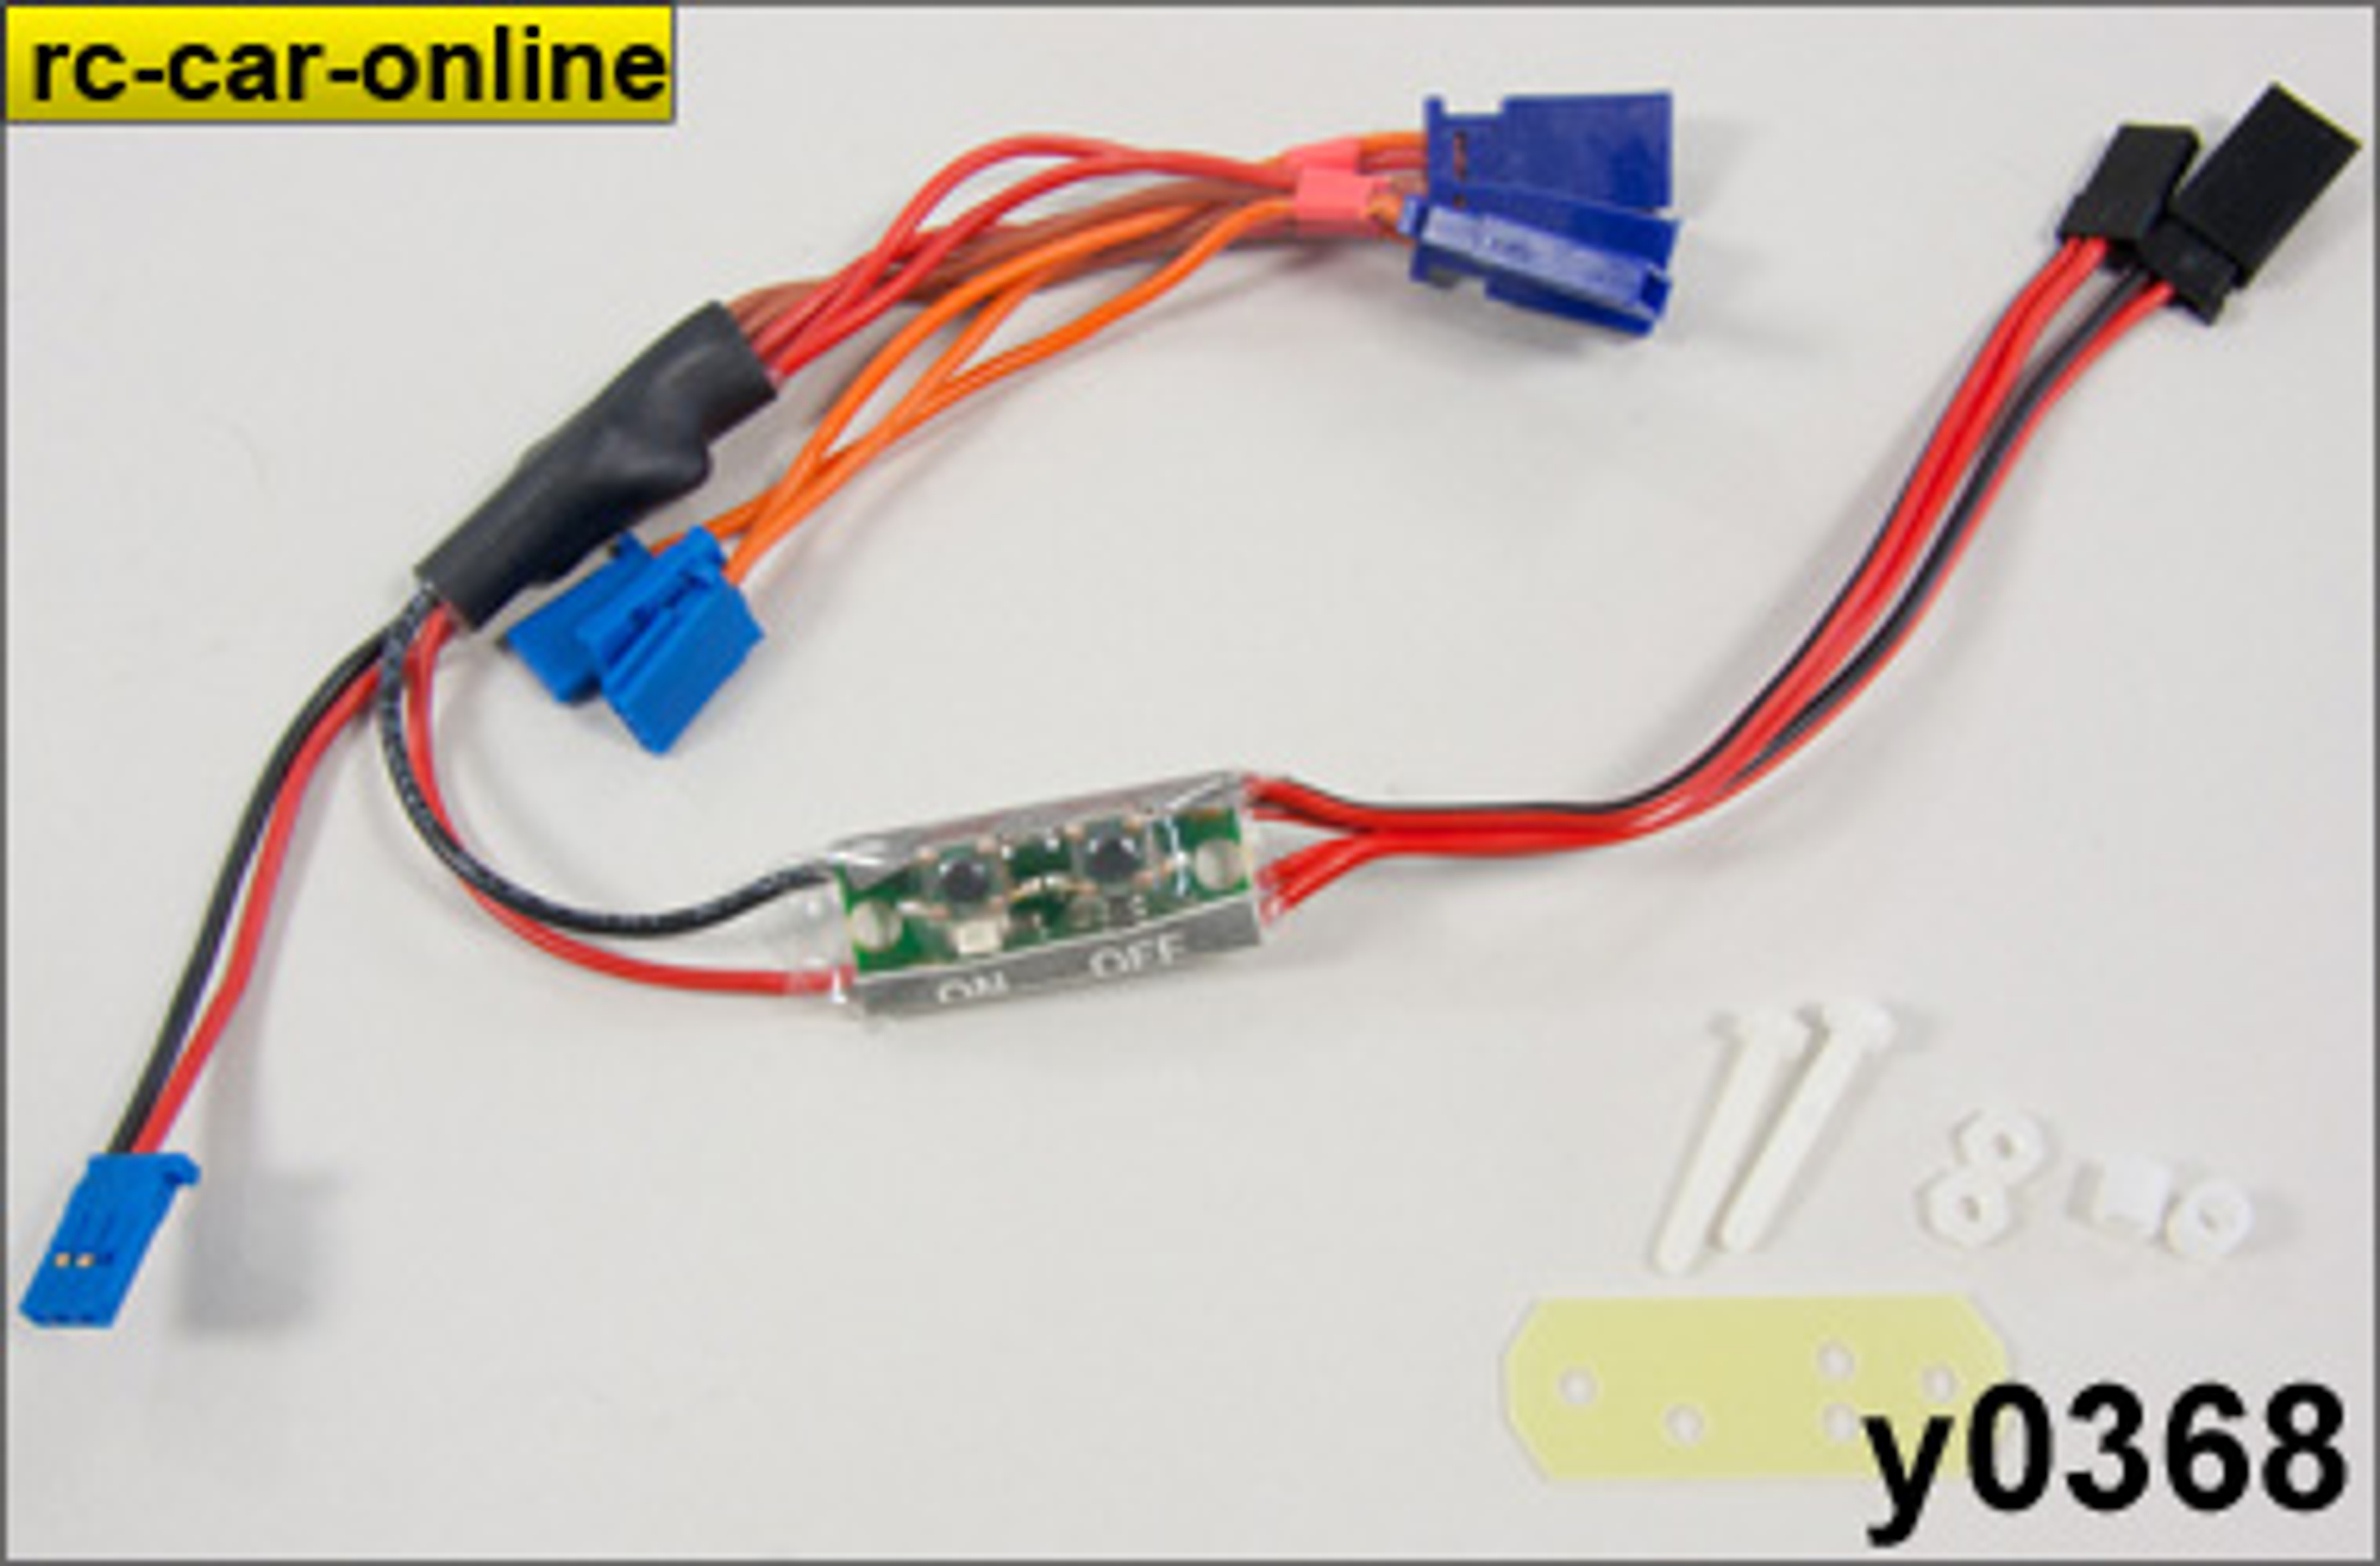 Servo direct power supply cable with electronic switch, 1 pce.